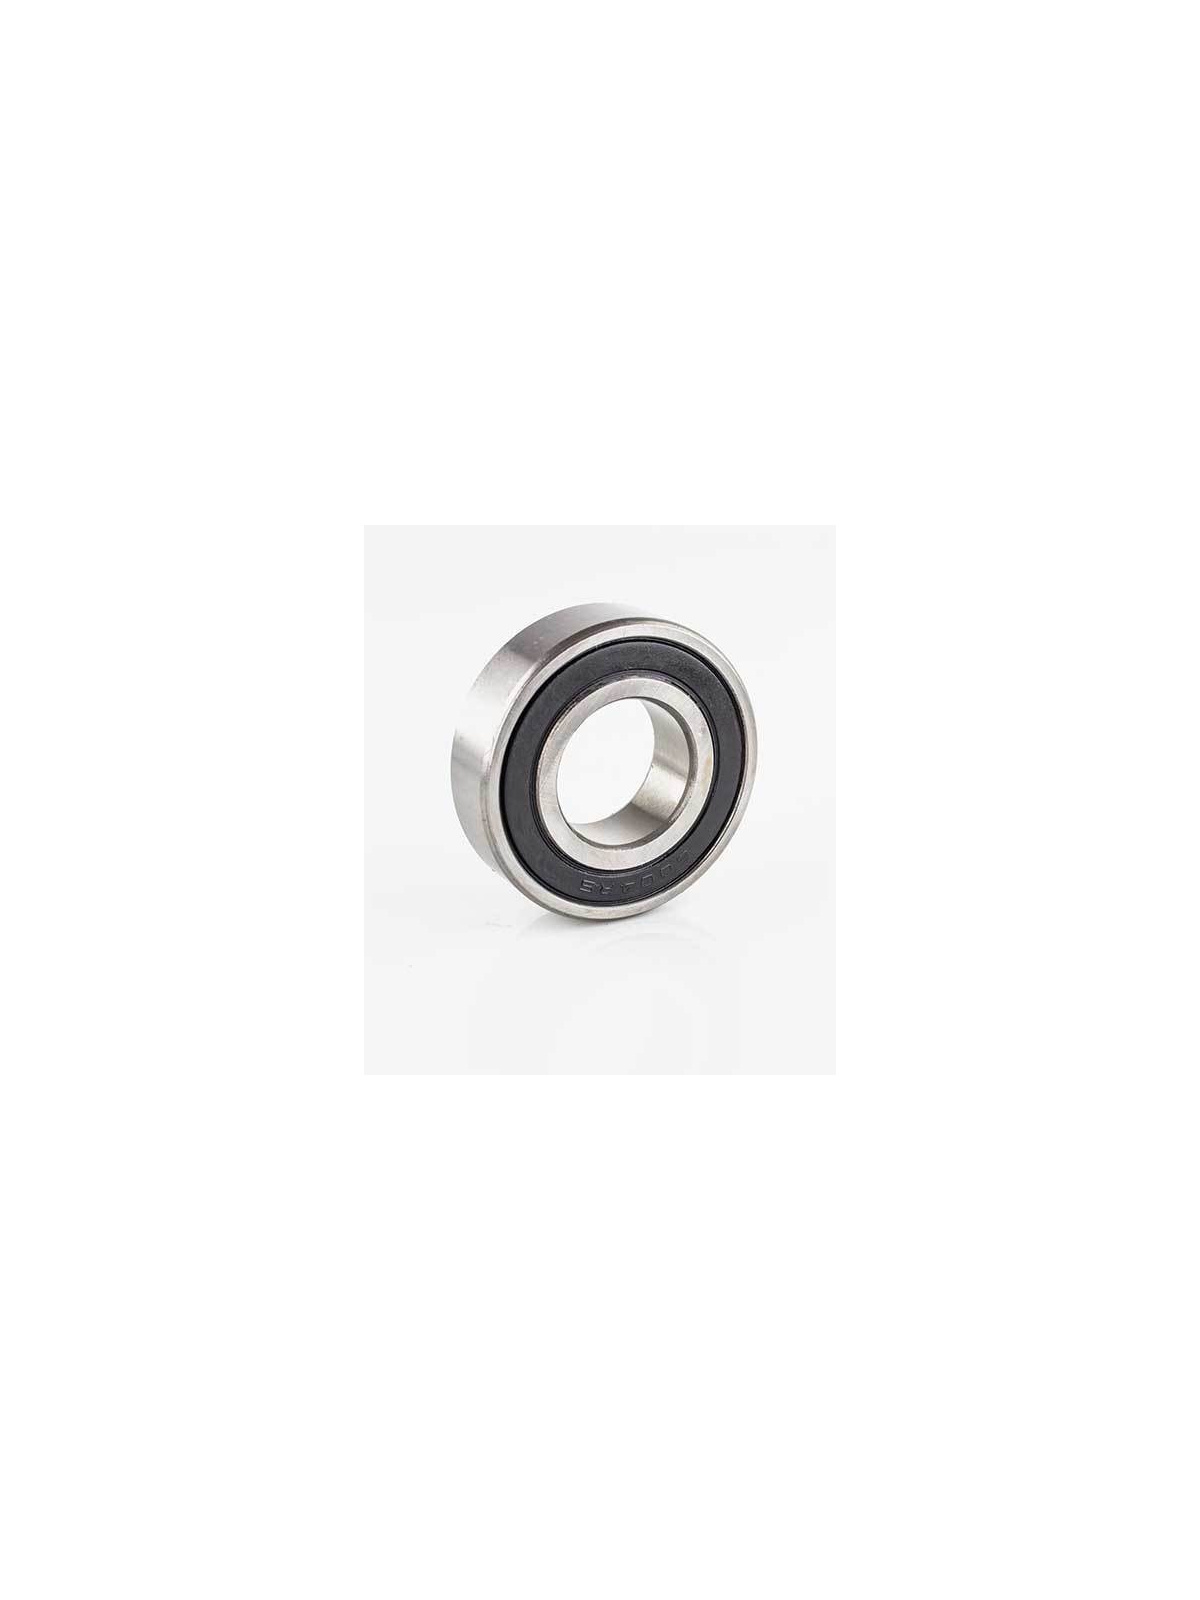  Roulement 6801-2RS / 61801-2RS 12x21x5mm | JVL-Europe